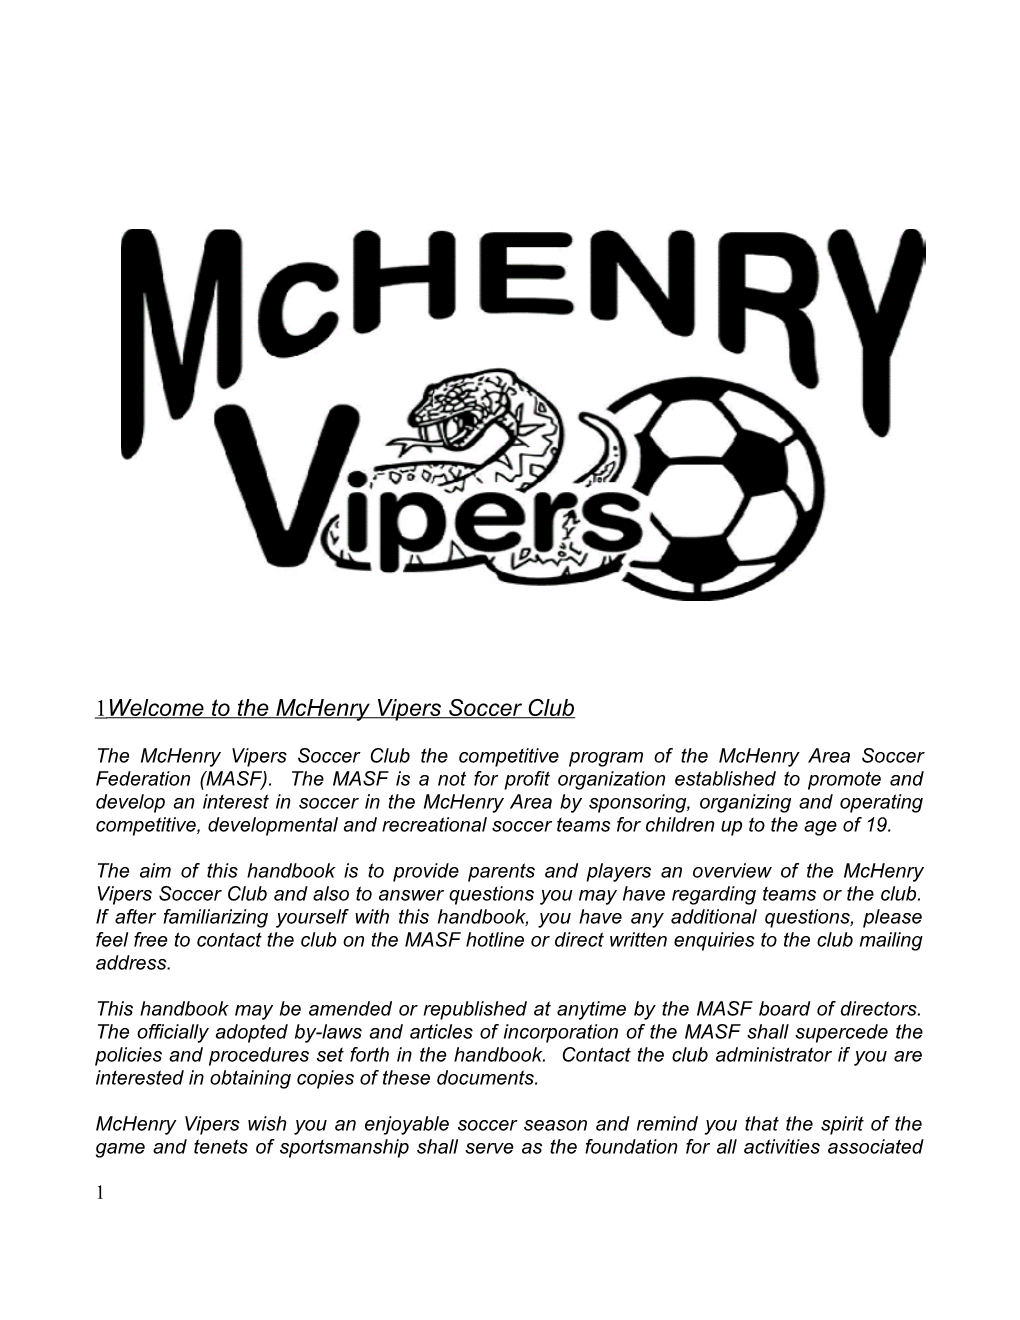 Philosophy of Mchenry Area Soccer Federation